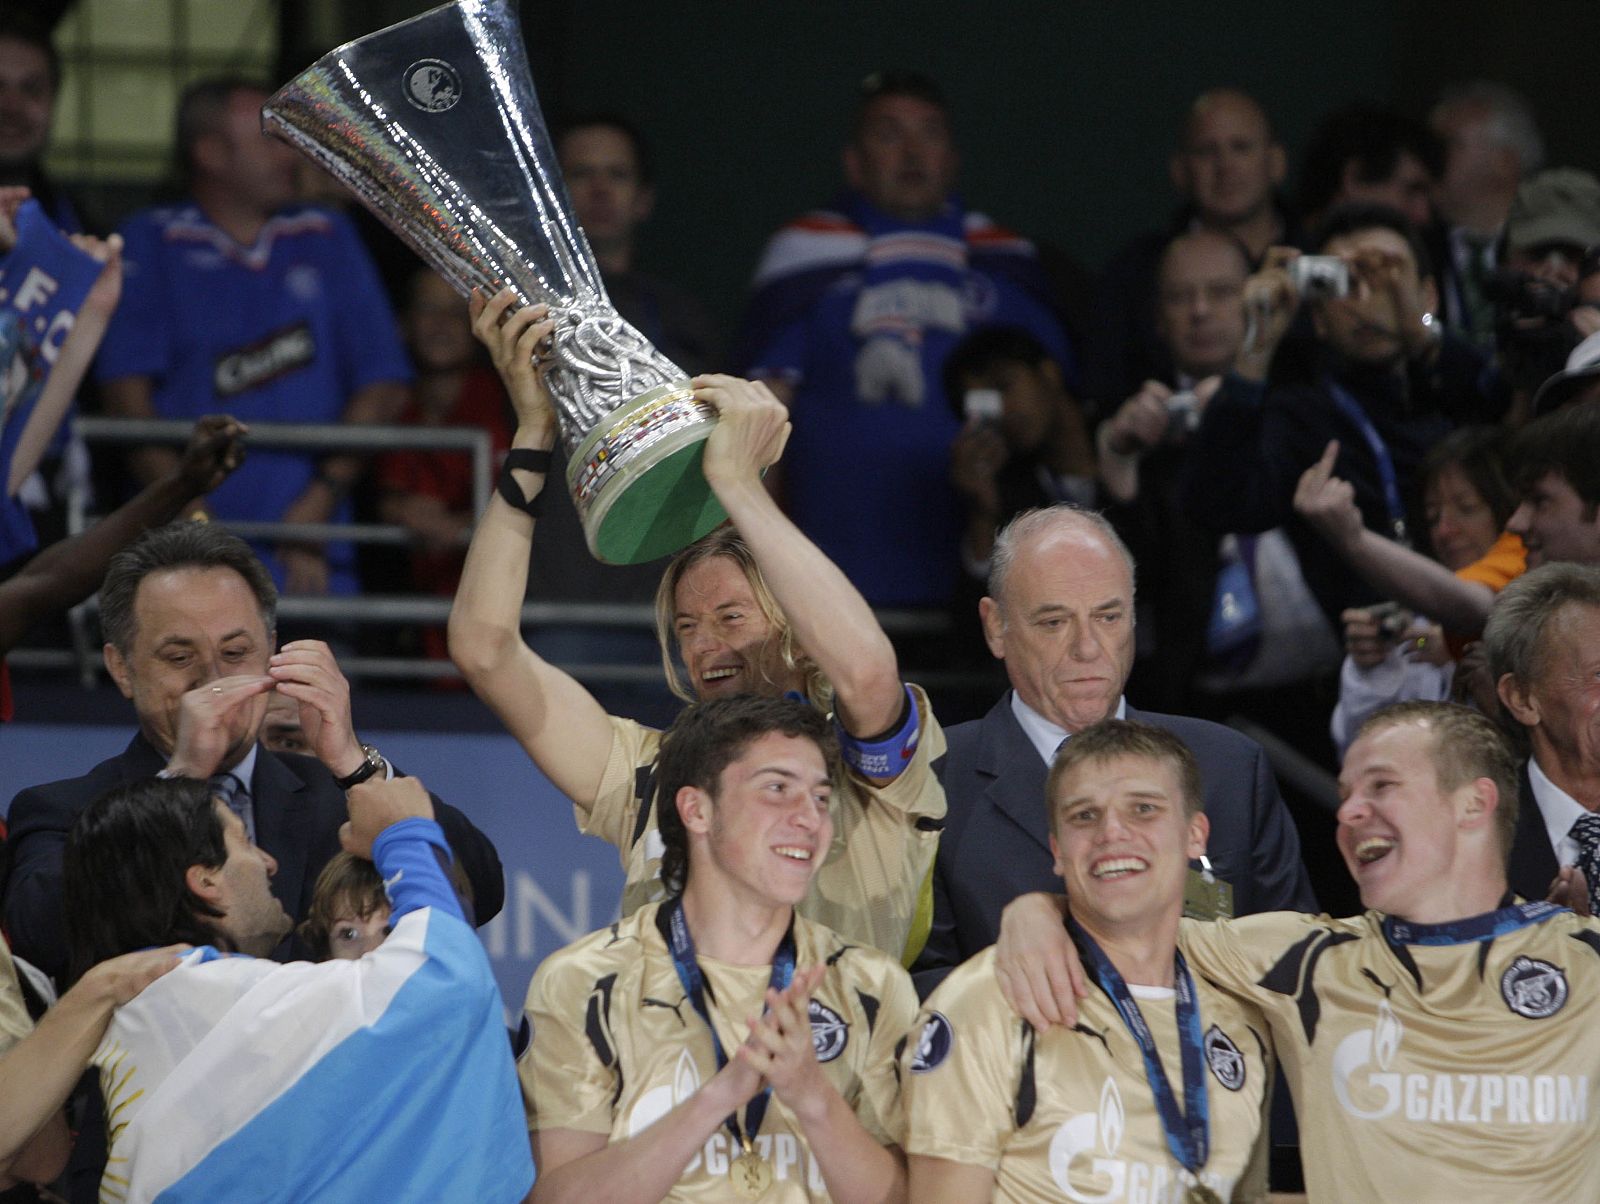 Zenit St Petersburg's Tymoschuk holds the UEFA Cup after his team defeated Rangers in their UEFA Cup final soccer match in Manchester